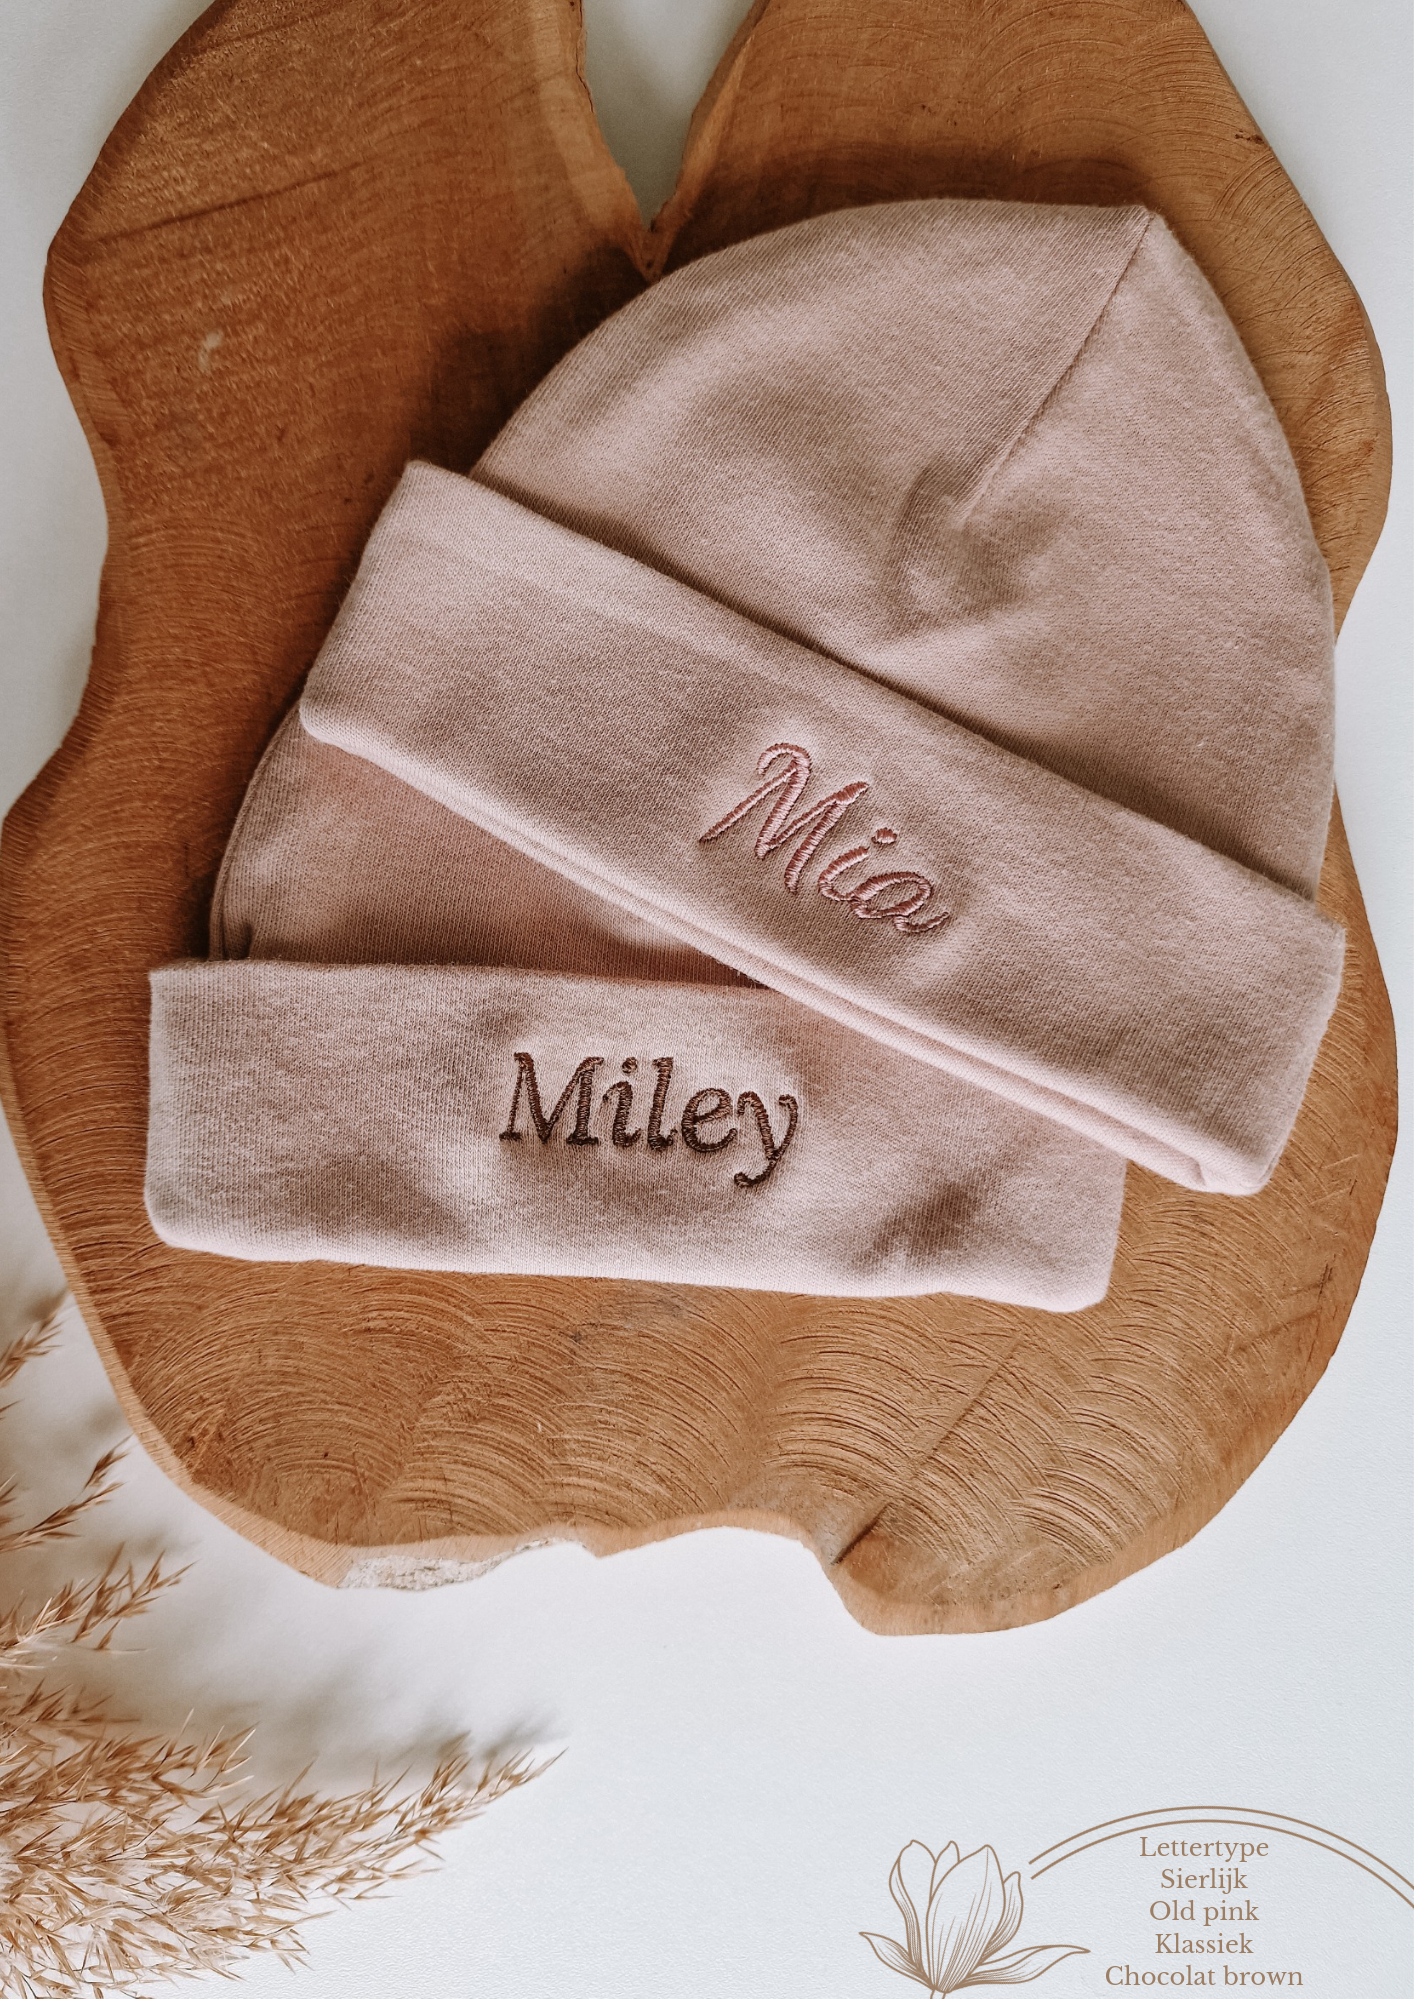 Baby hat with name | Powder pink